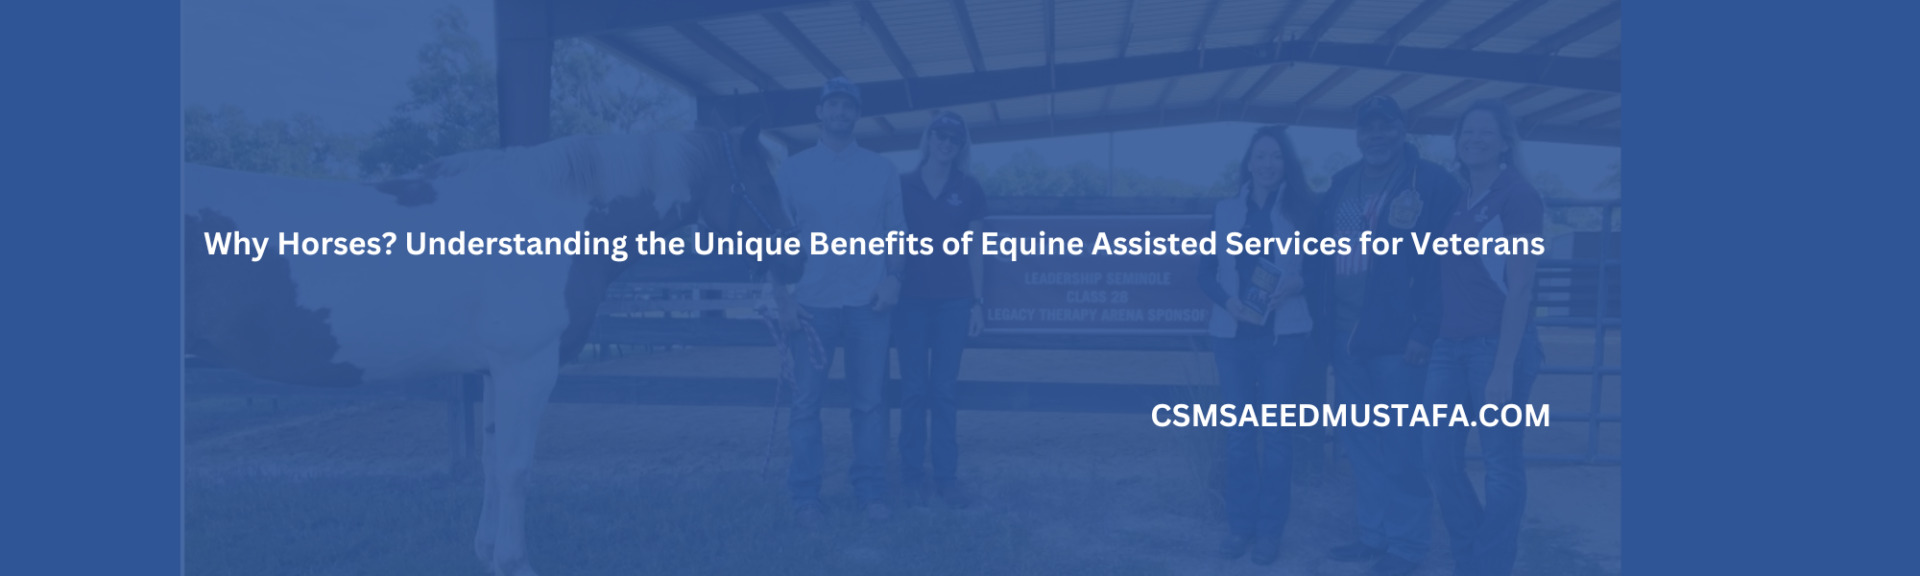 Unique benefits of equine assisted services for veterans